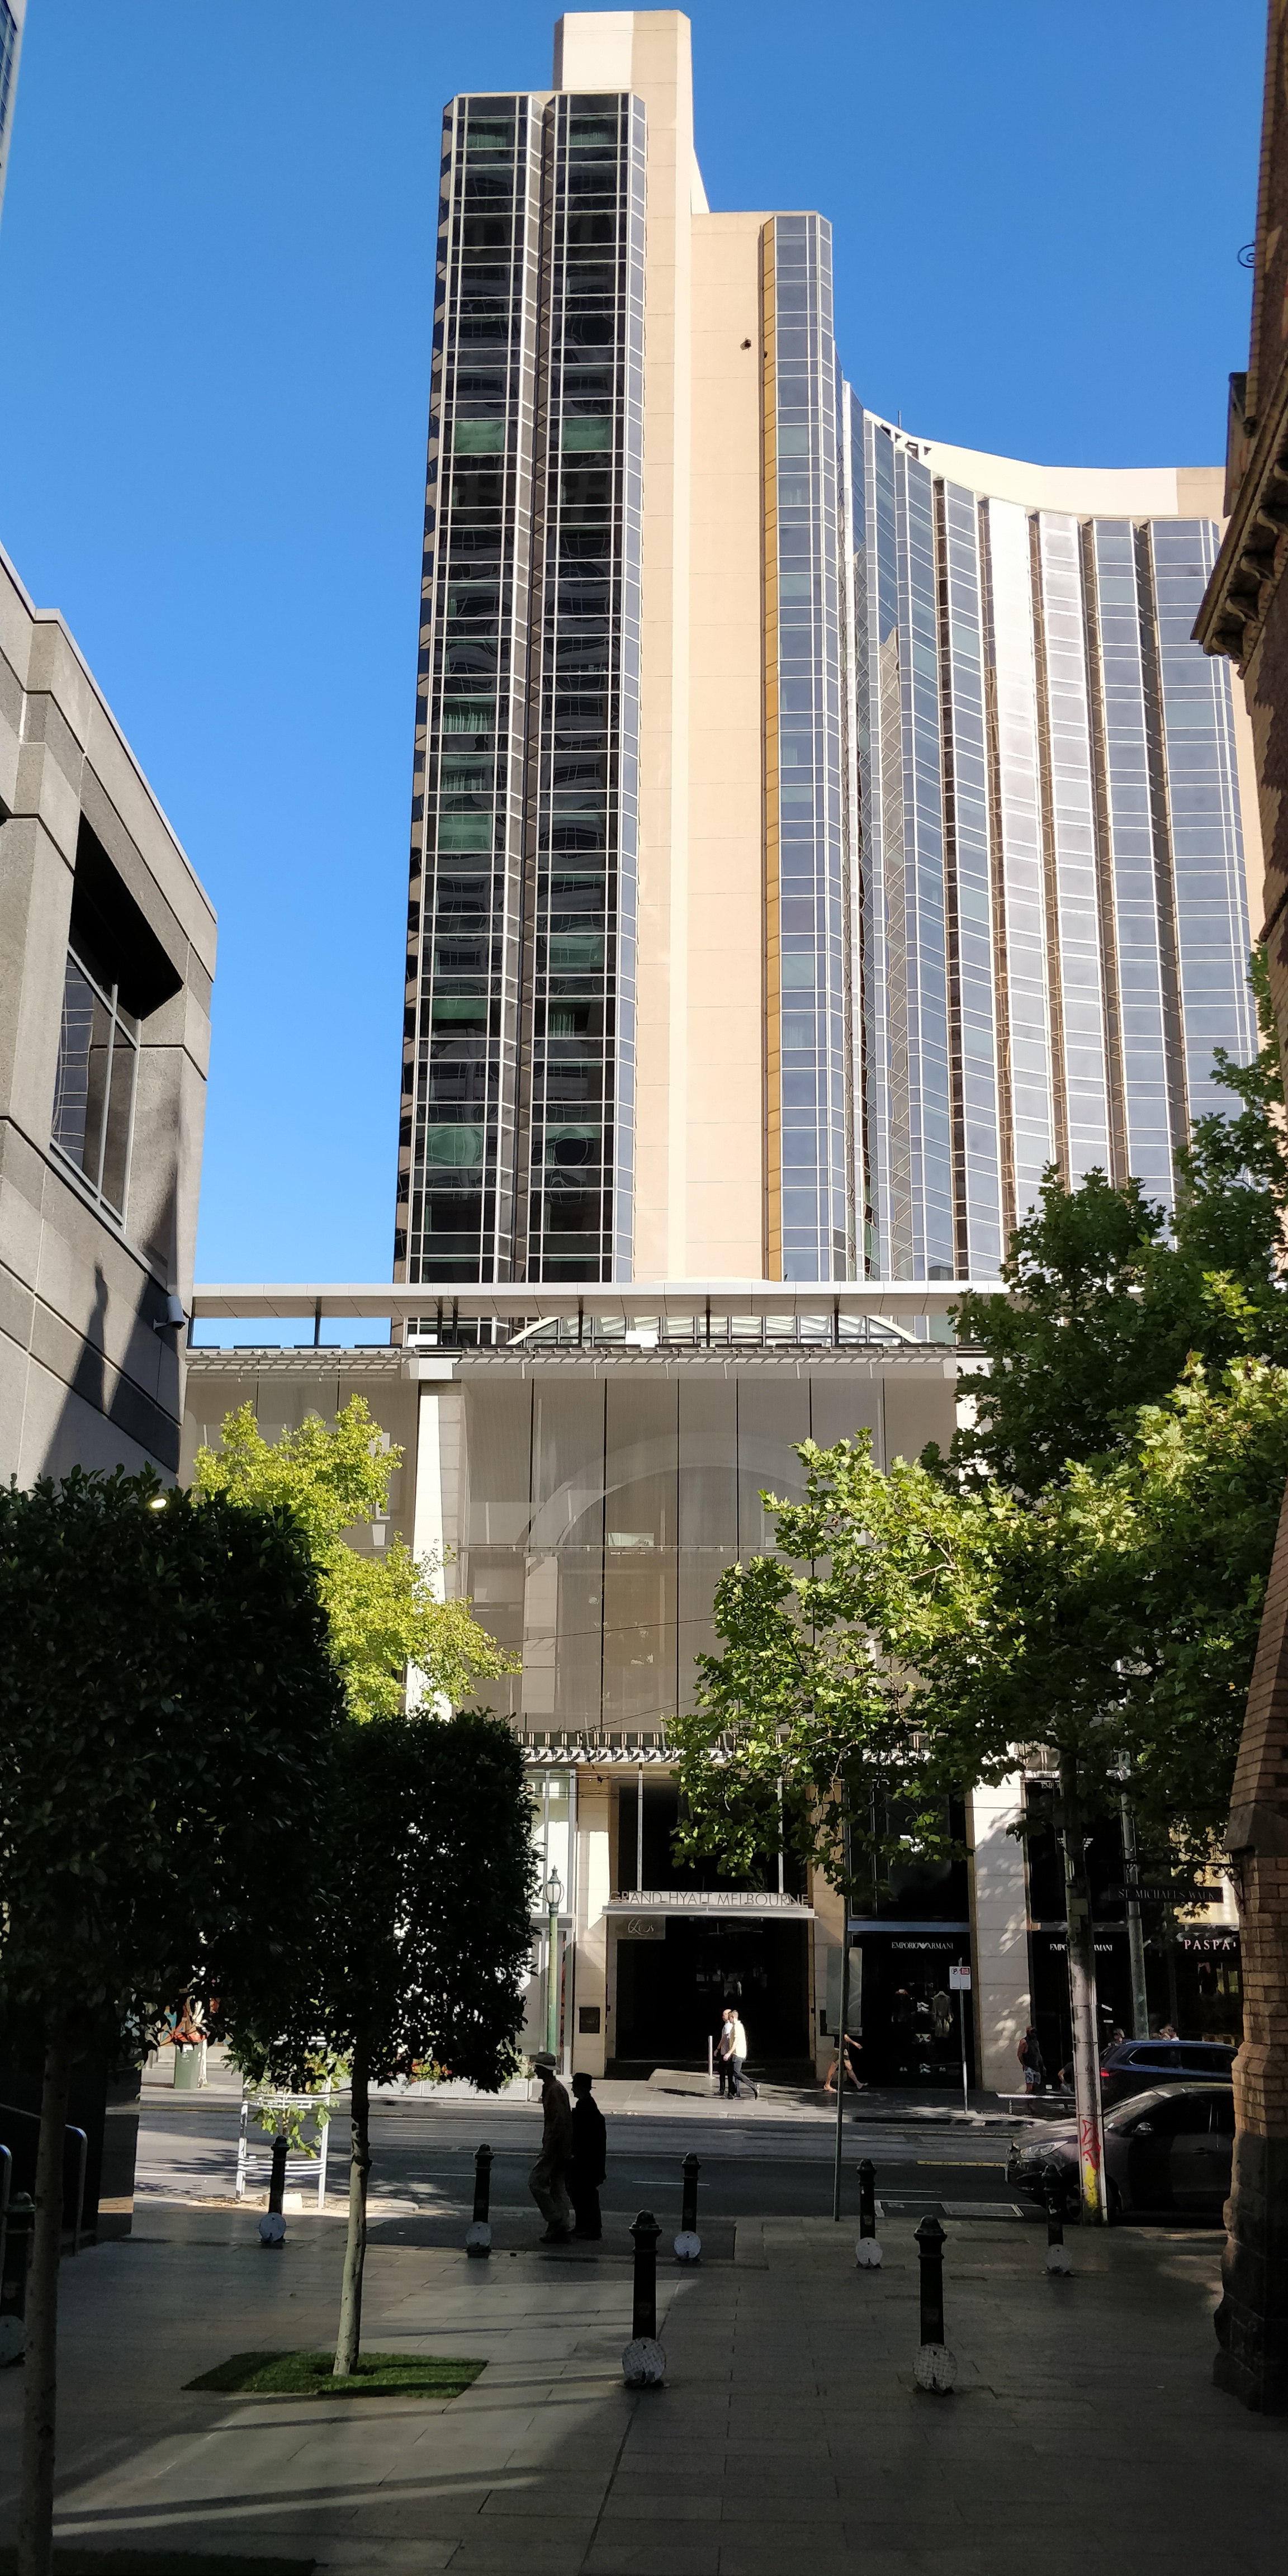 A PICTURE OF THE GRAND HYATT MELBOURNE